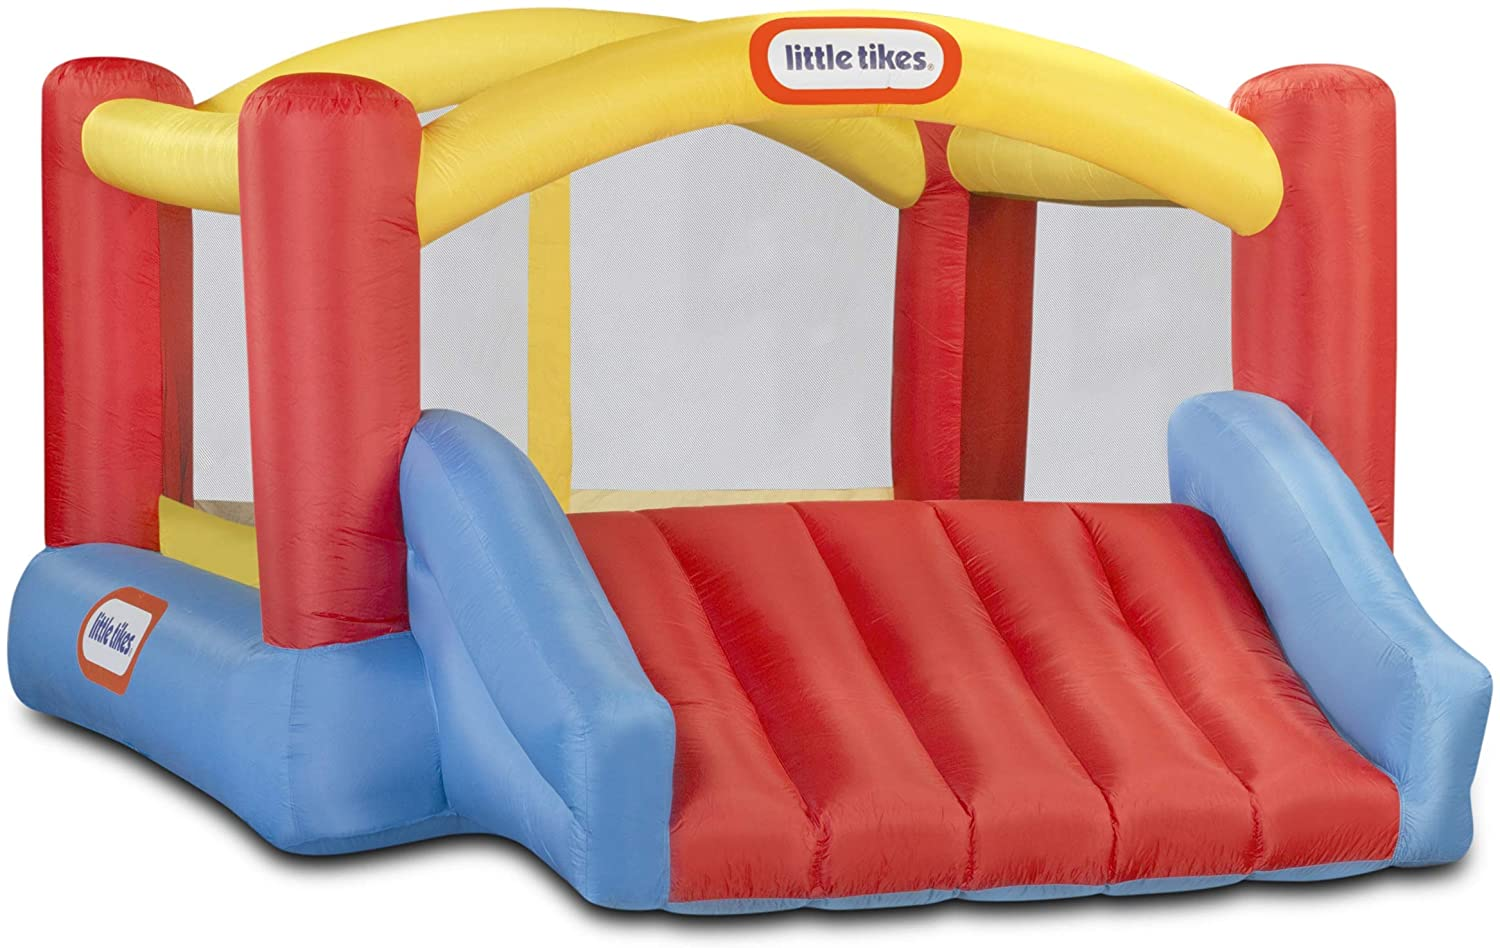 Amazon.com: $197 after 30%off Little Tikes Jump 'n Slide Bouncer - Inflatable Jumper Bounce House $197